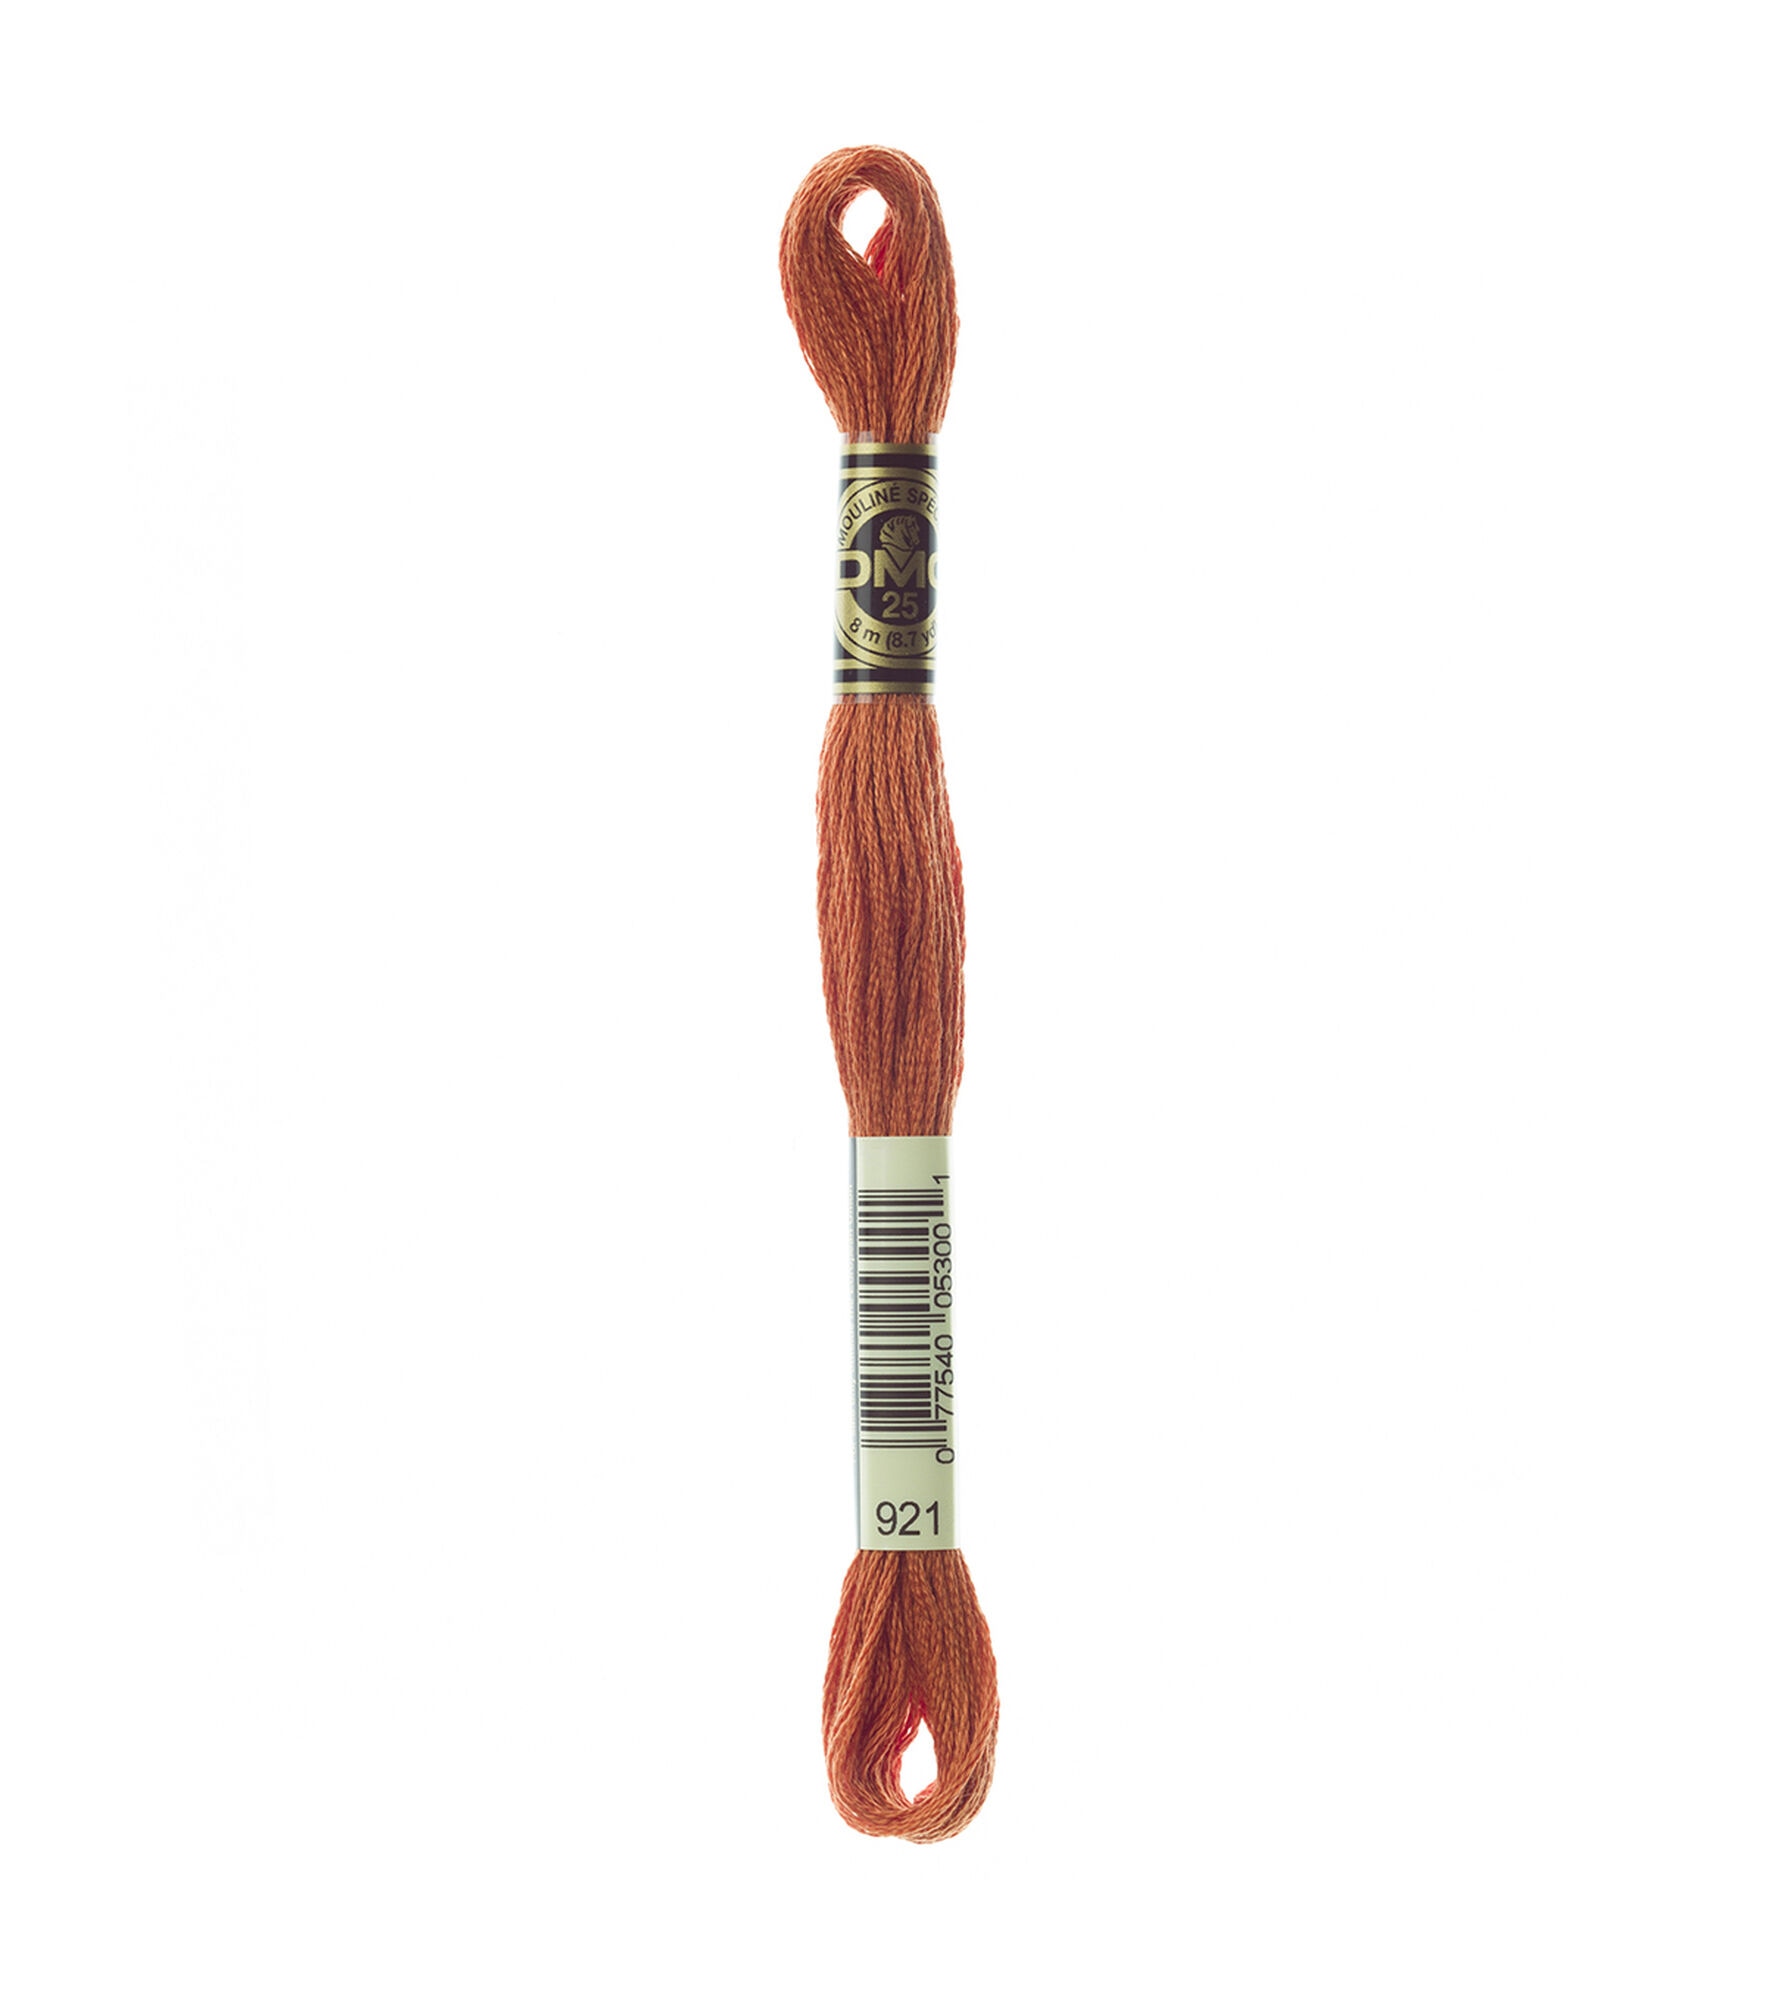 DMC 8.7yd Reds 6 Strand Cotton Embroidery Floss, 921 Copper, hi-res